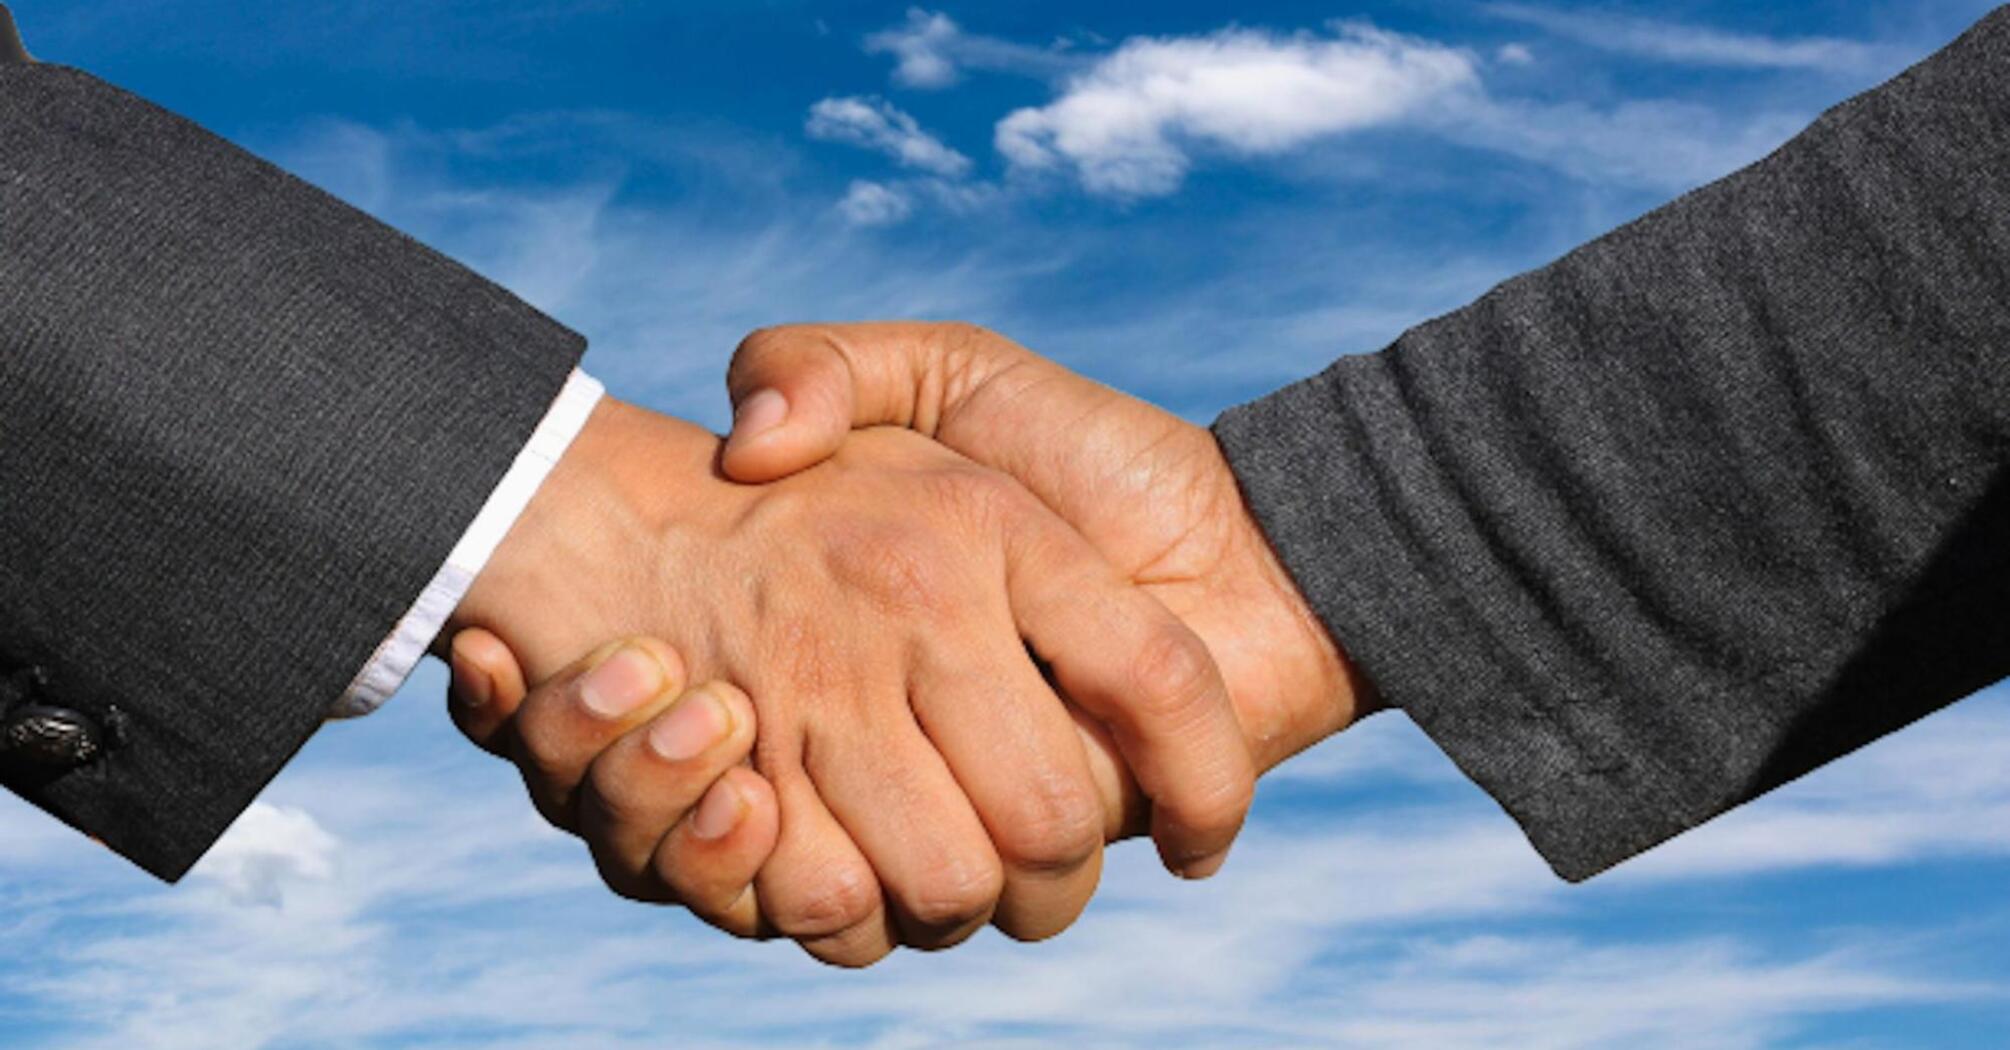 Shaking hands of two men against the sky